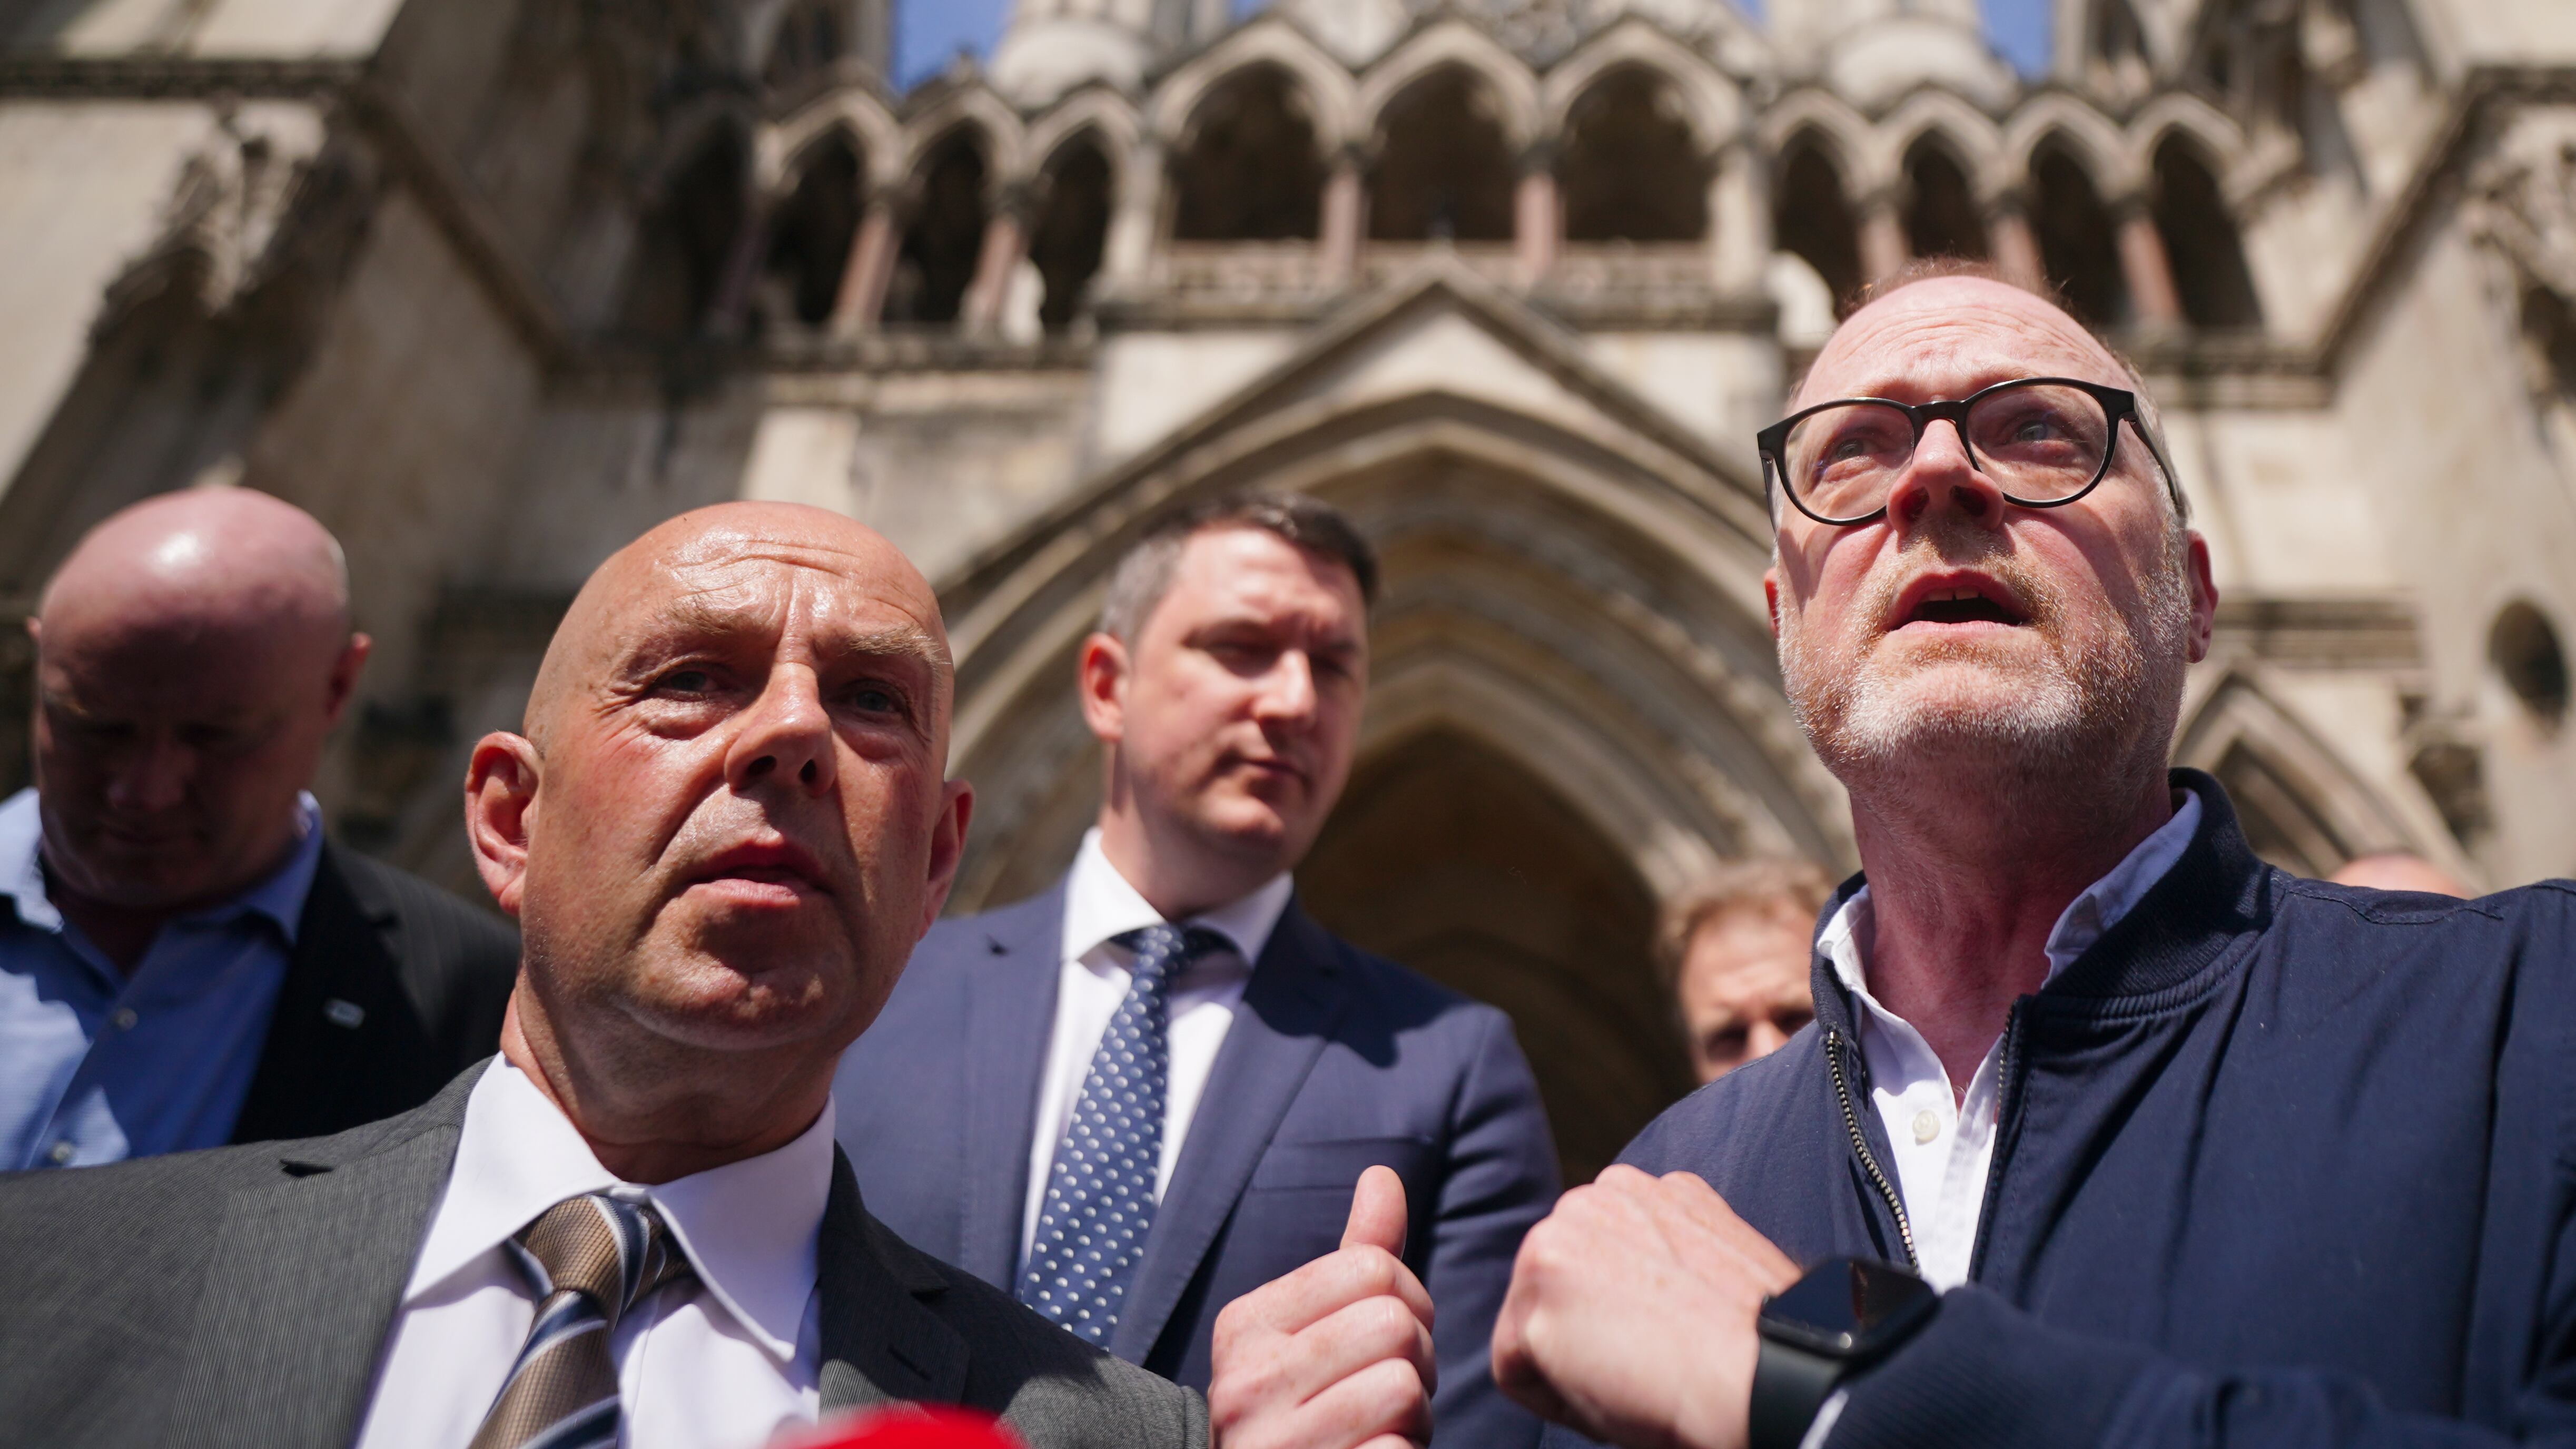 Journalists Barry McCaffrey (left) and Trevor Birney (right) speaking to media after leaving the Royal Courts of Justice, in London, following an Investigatory Powers Tribunal (IPT) hearing over claims they were secretly monitored by police